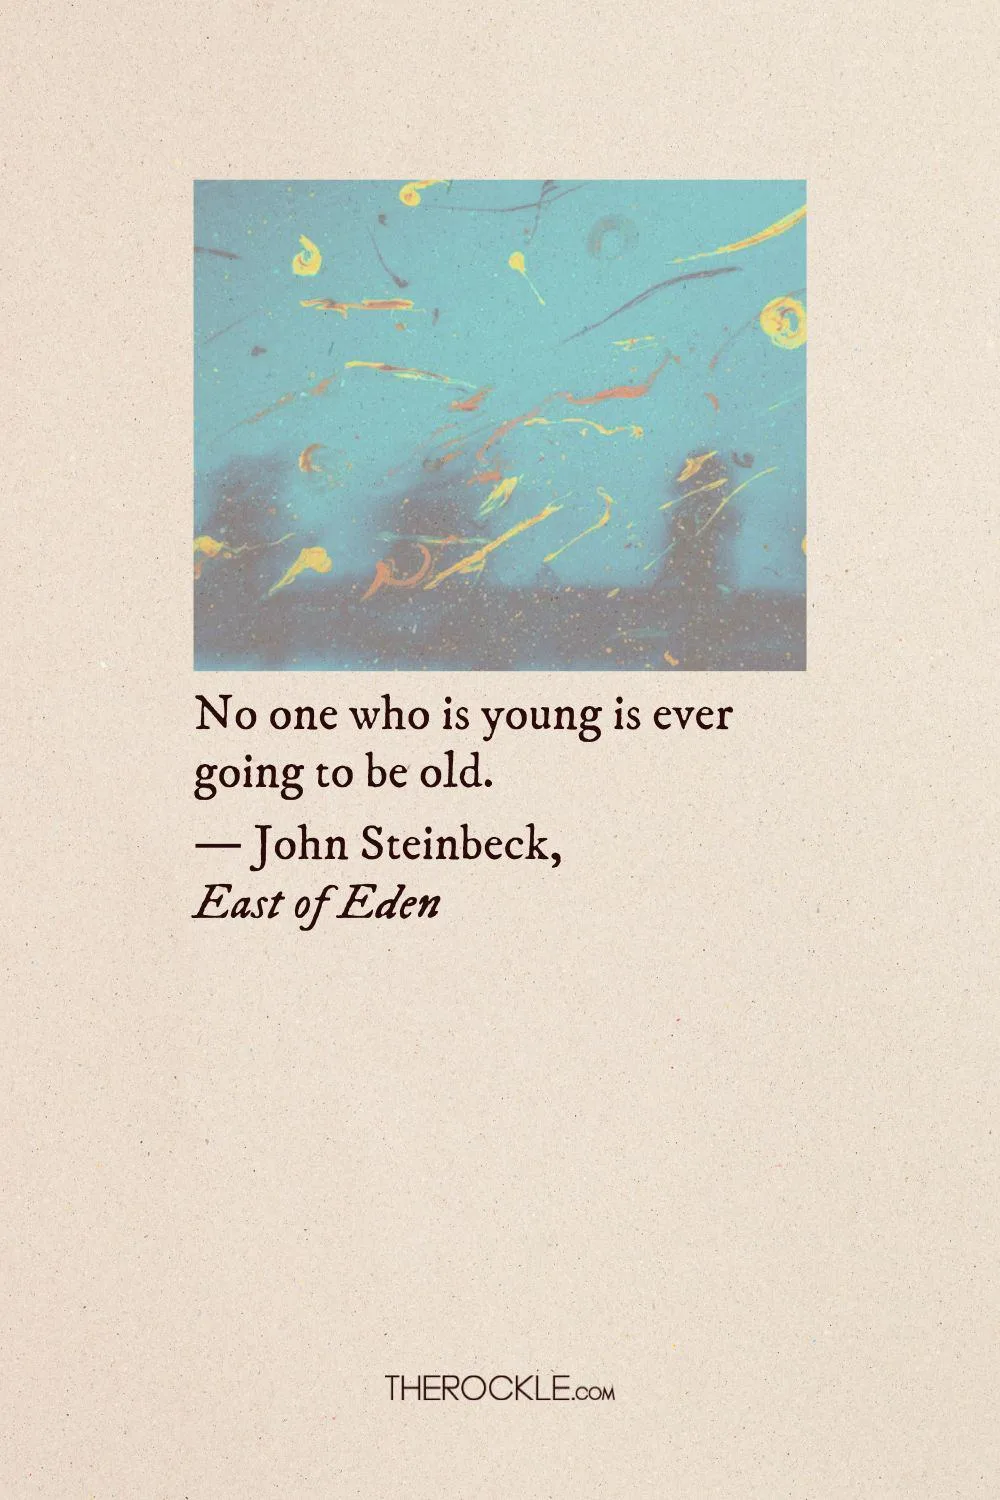 Steinbeck on perception of aging